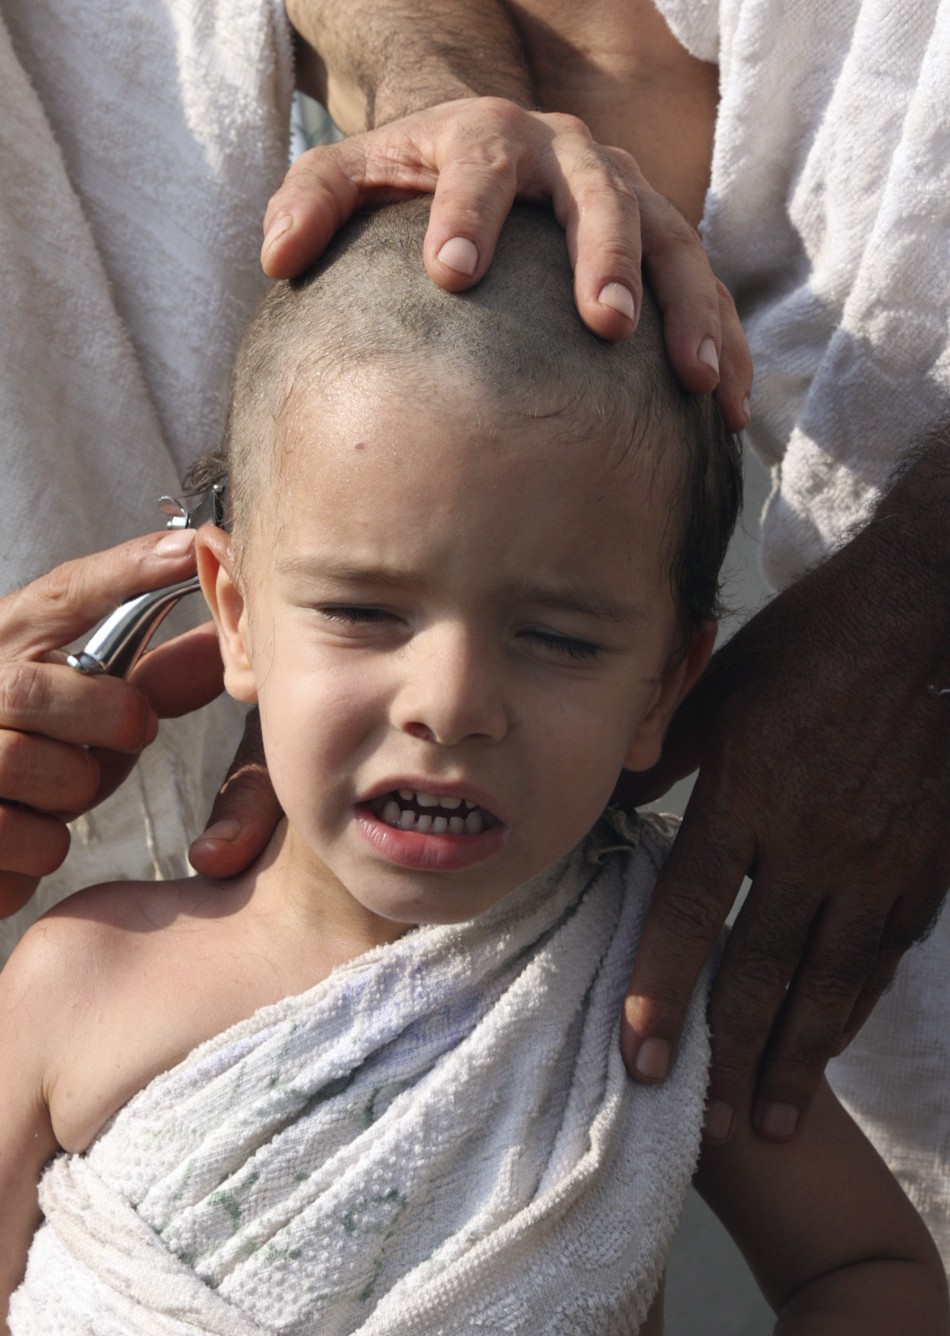 A Muslim pilgrim shaves his sons head during the haj pilgrimage in Mena, outside Mecca